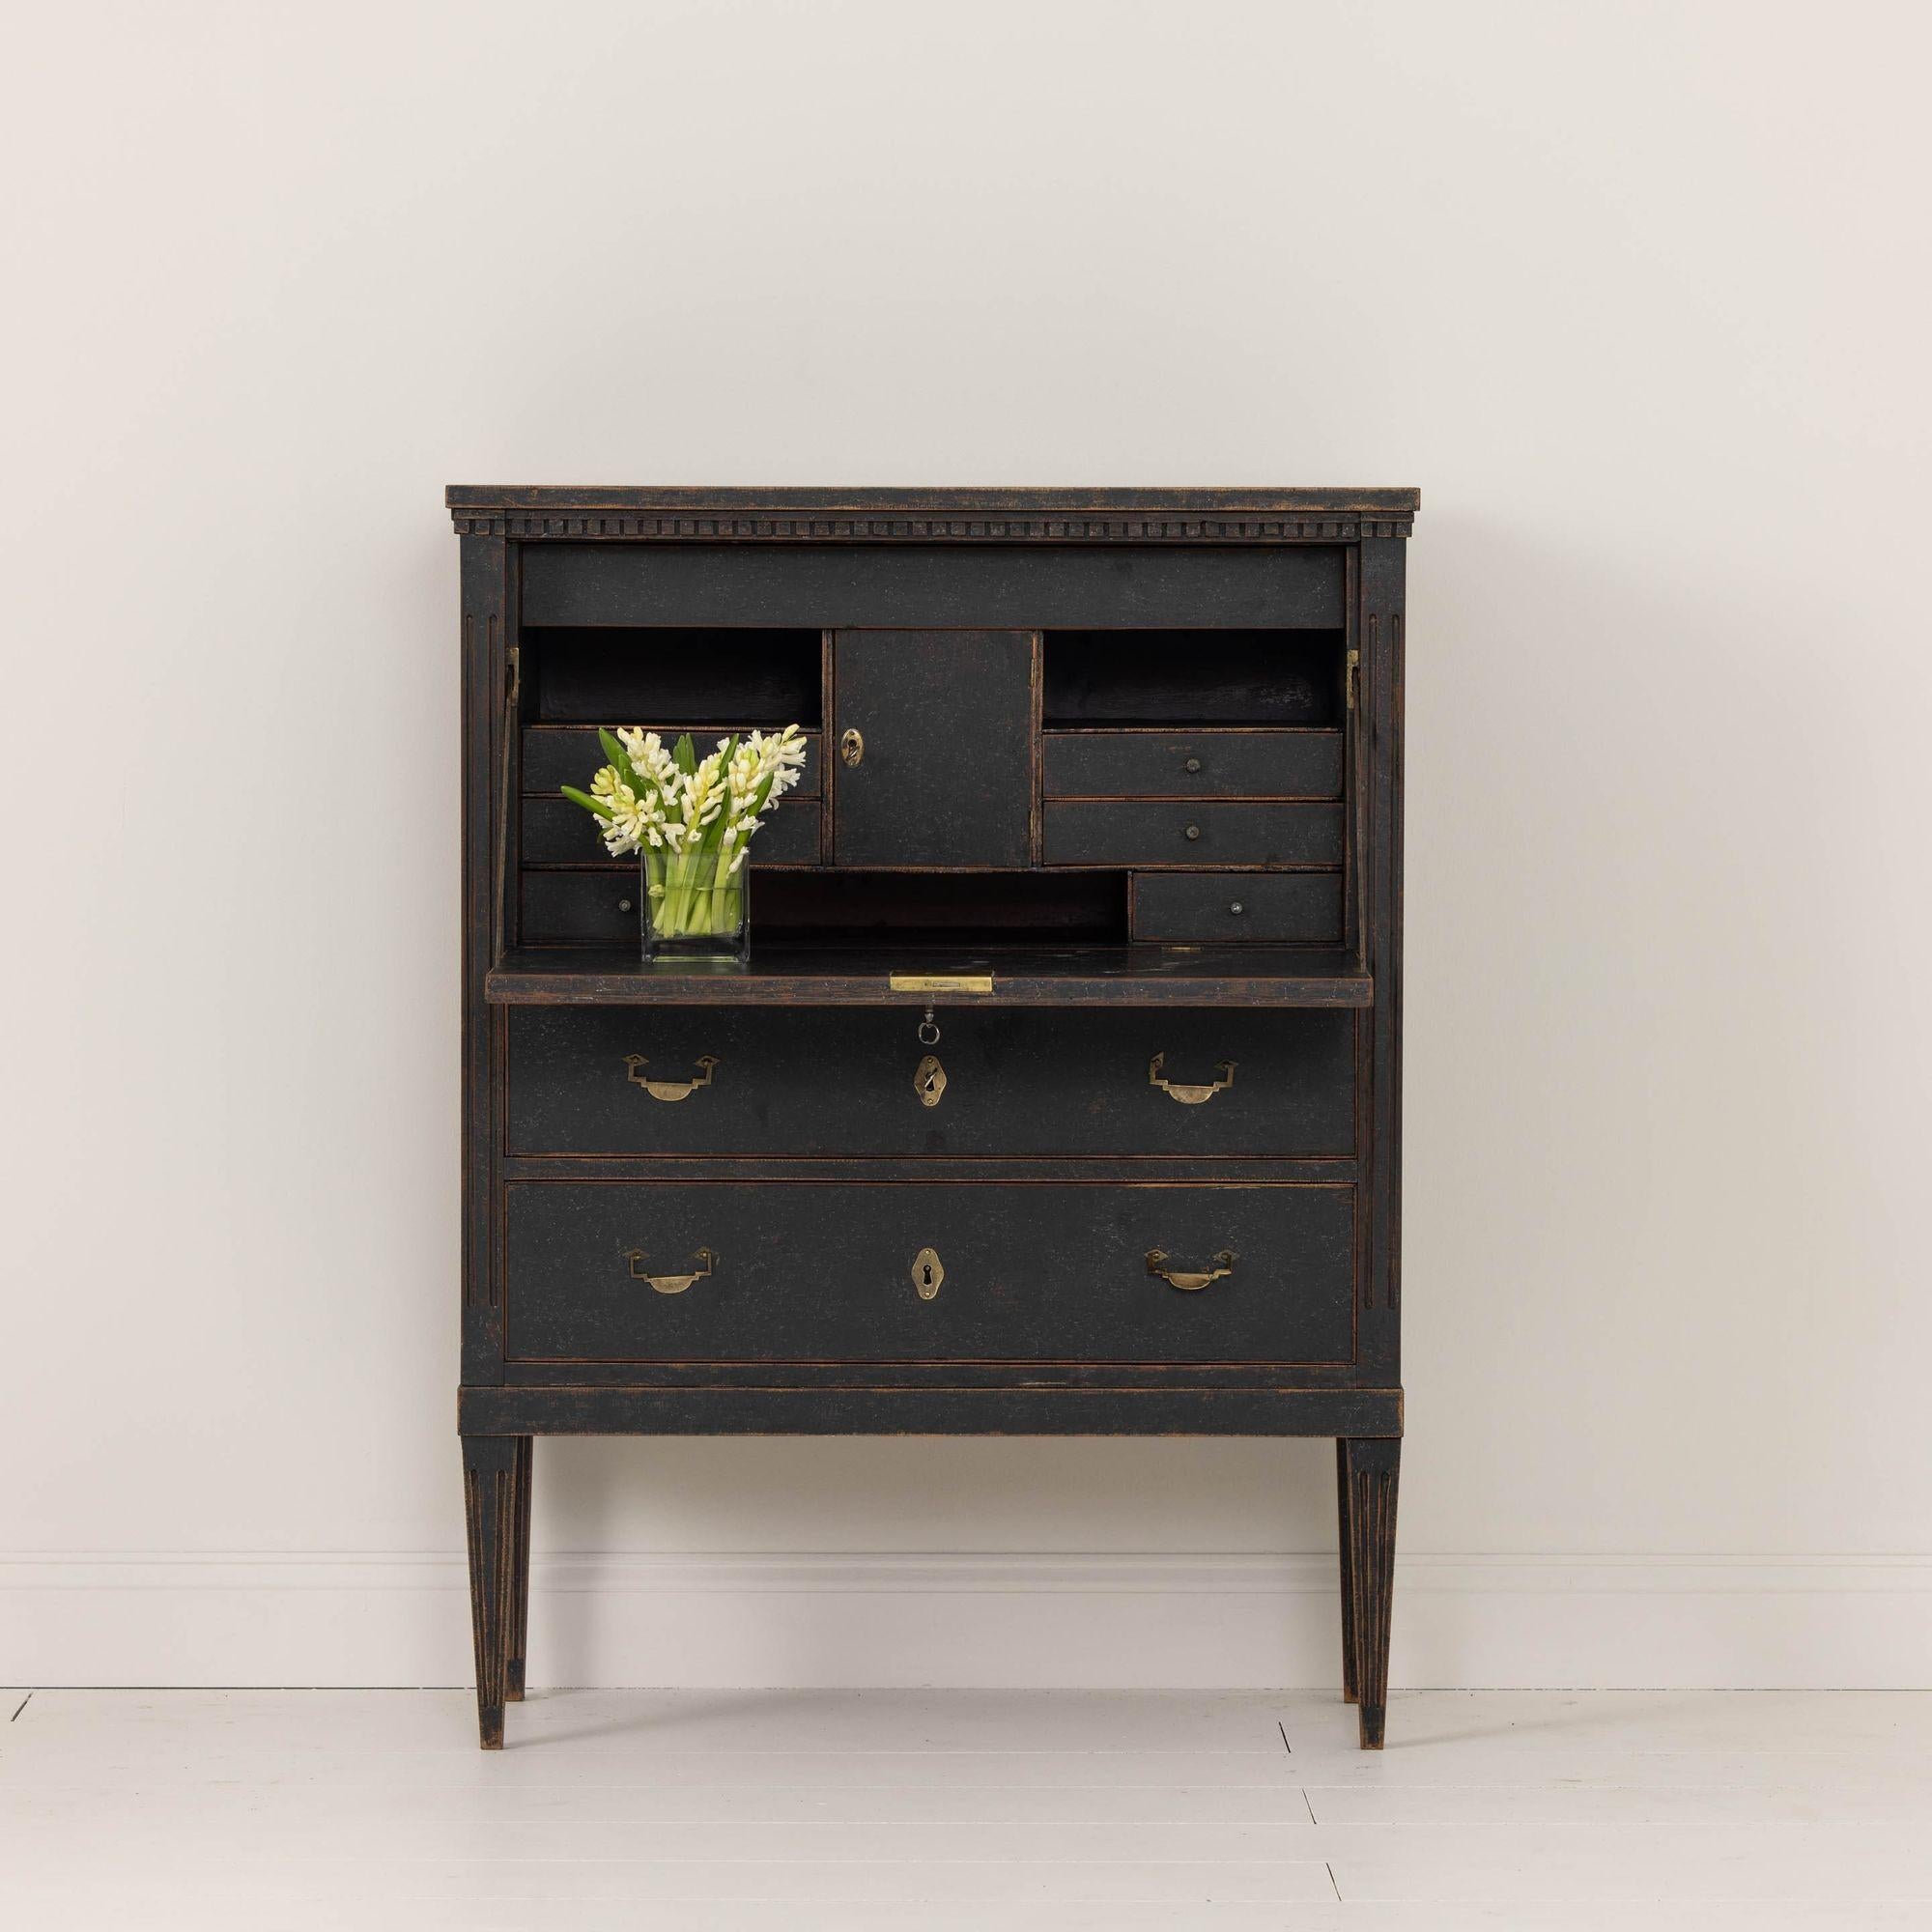 An 18th century Swedish fall-front bureau from the Gustavian period wearing beautiful black paint, circa 1790. Original brass hardware and locks. This secretary displays neoclassical carving such as the dentil molding detail around the top. There